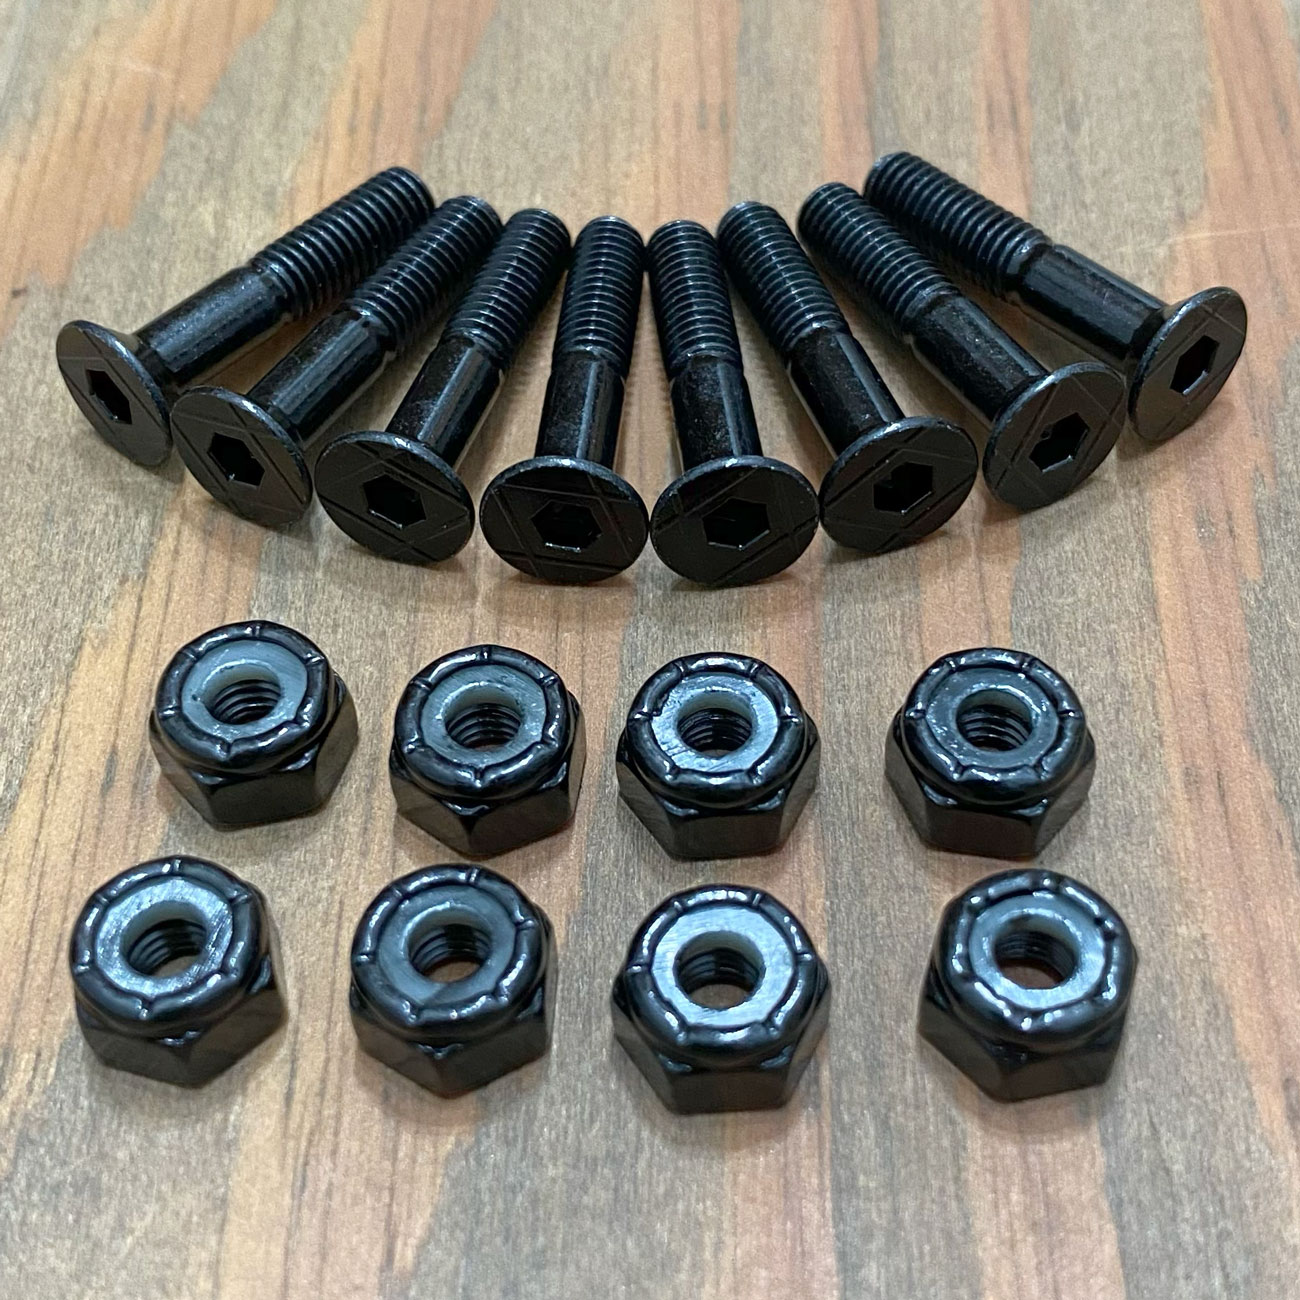 【1inch六角】INDEPENDENT PRECISION BOLTS